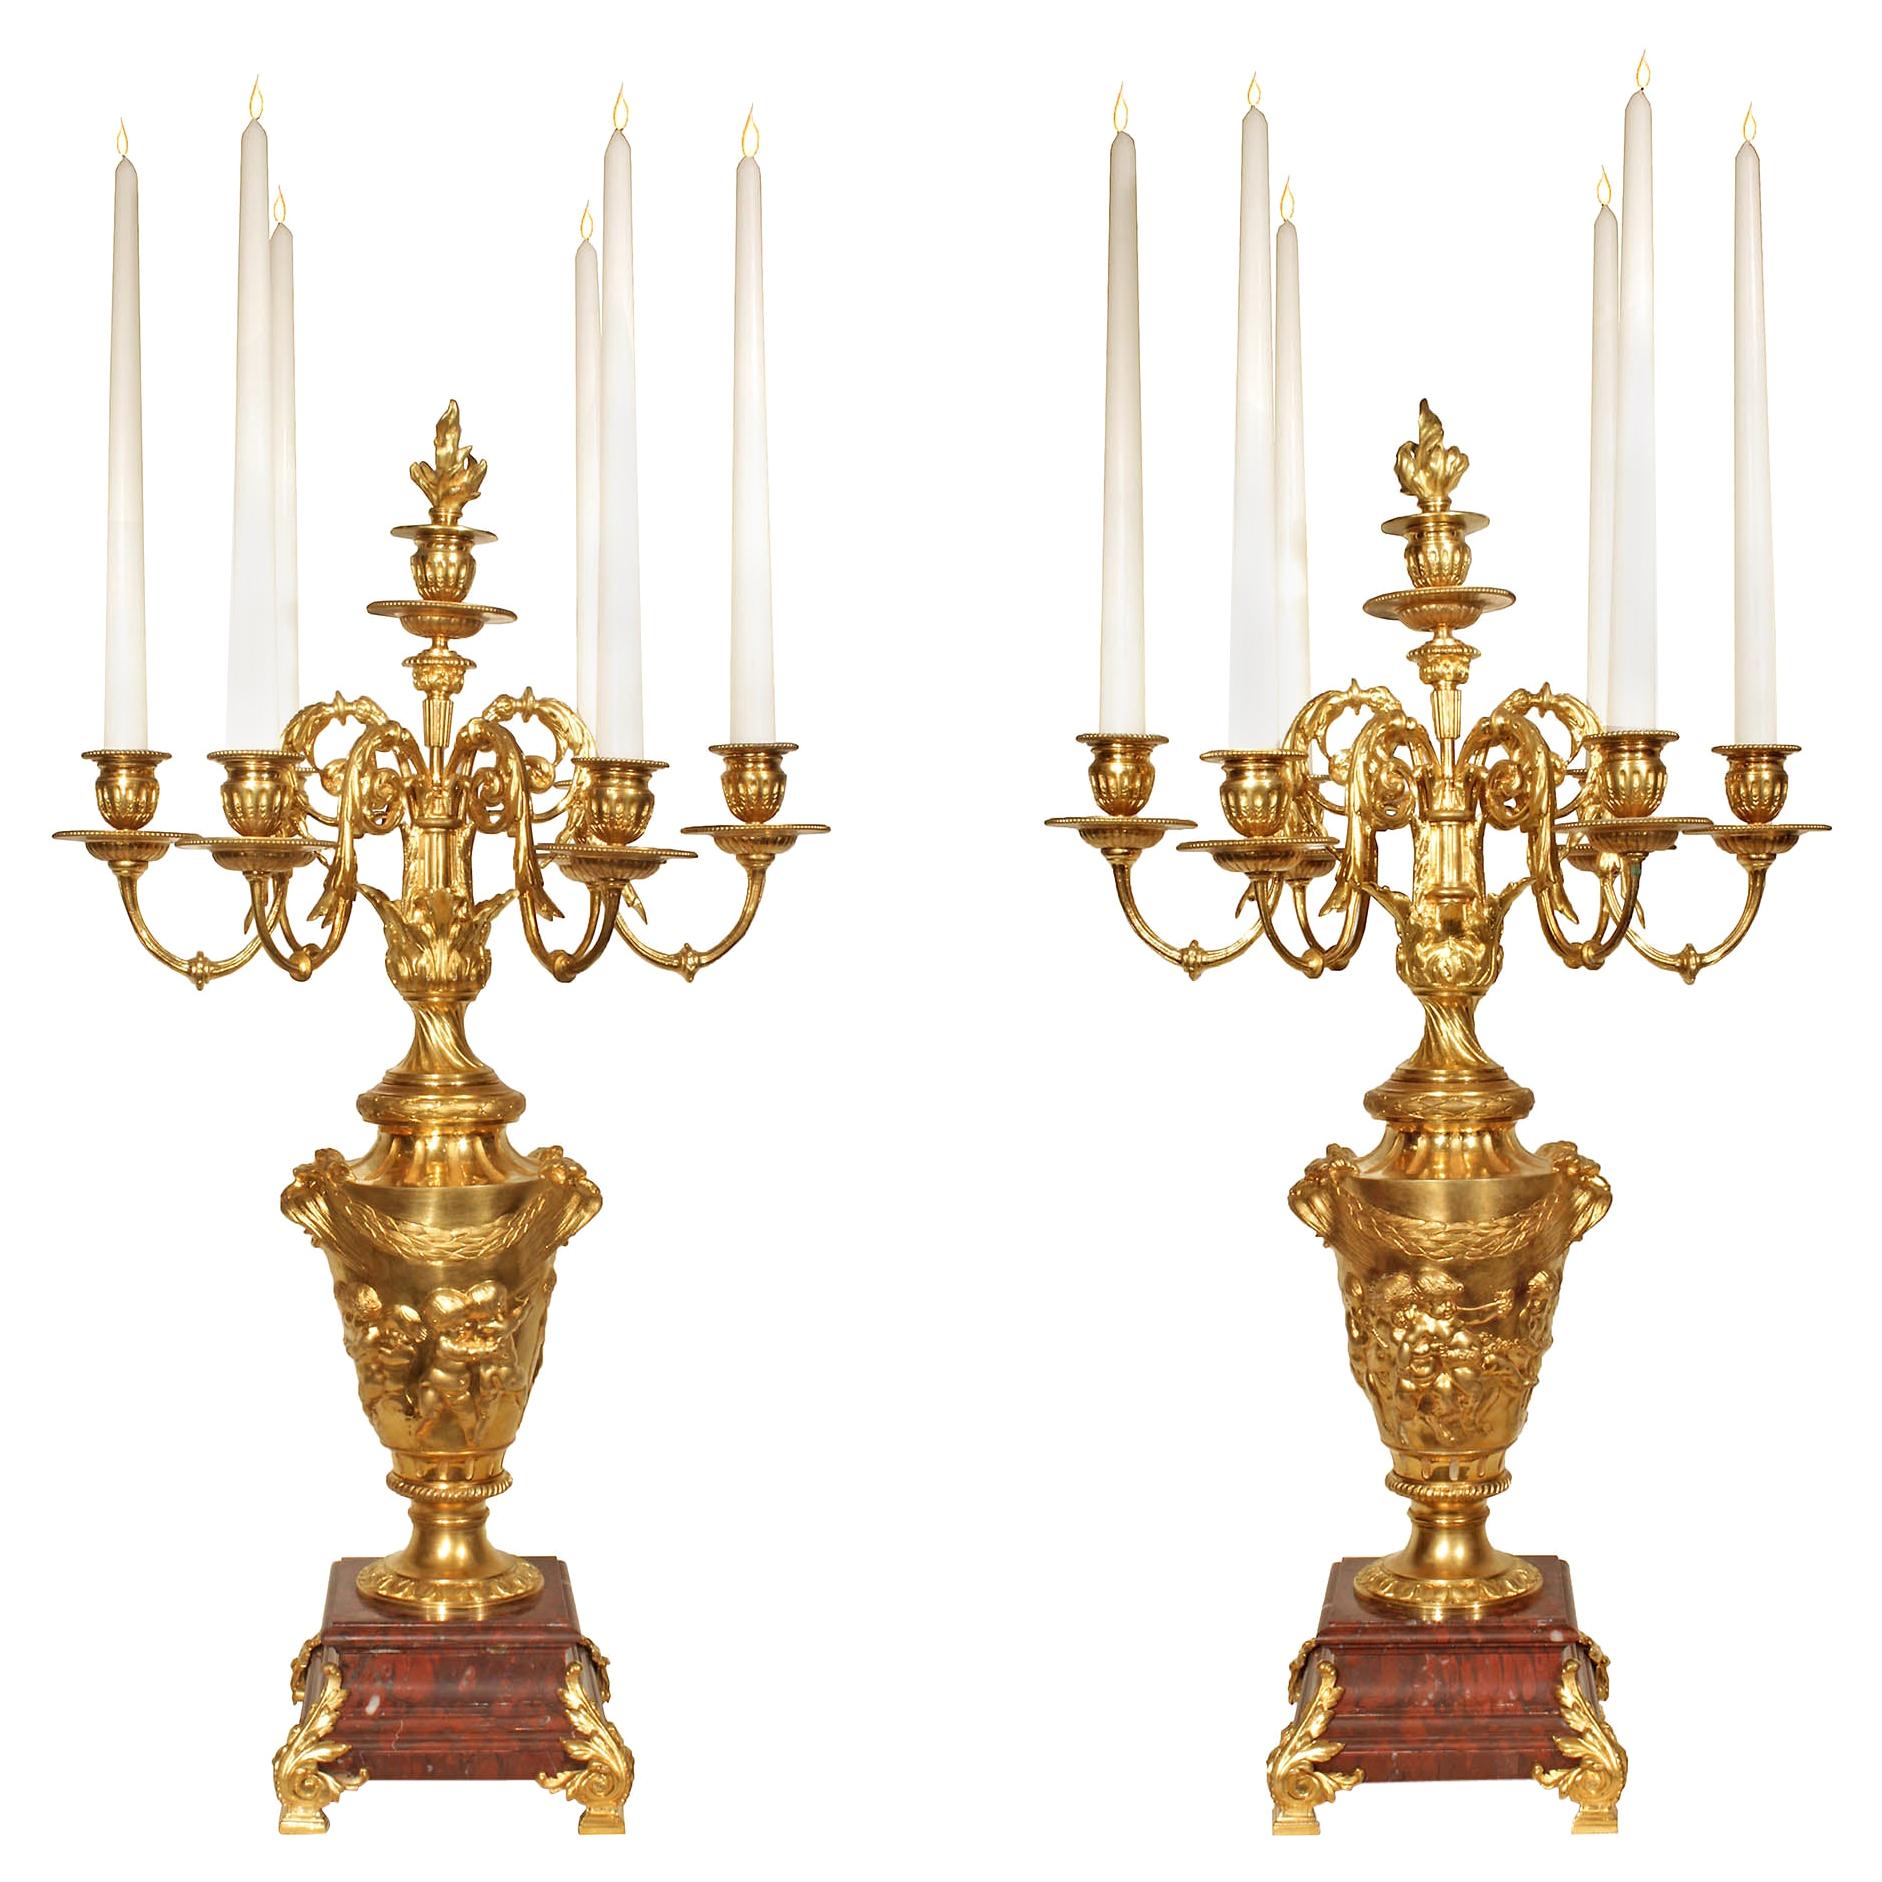 Pair of 19th Century Louis XVI Style Ormolu and Marble Candelabras